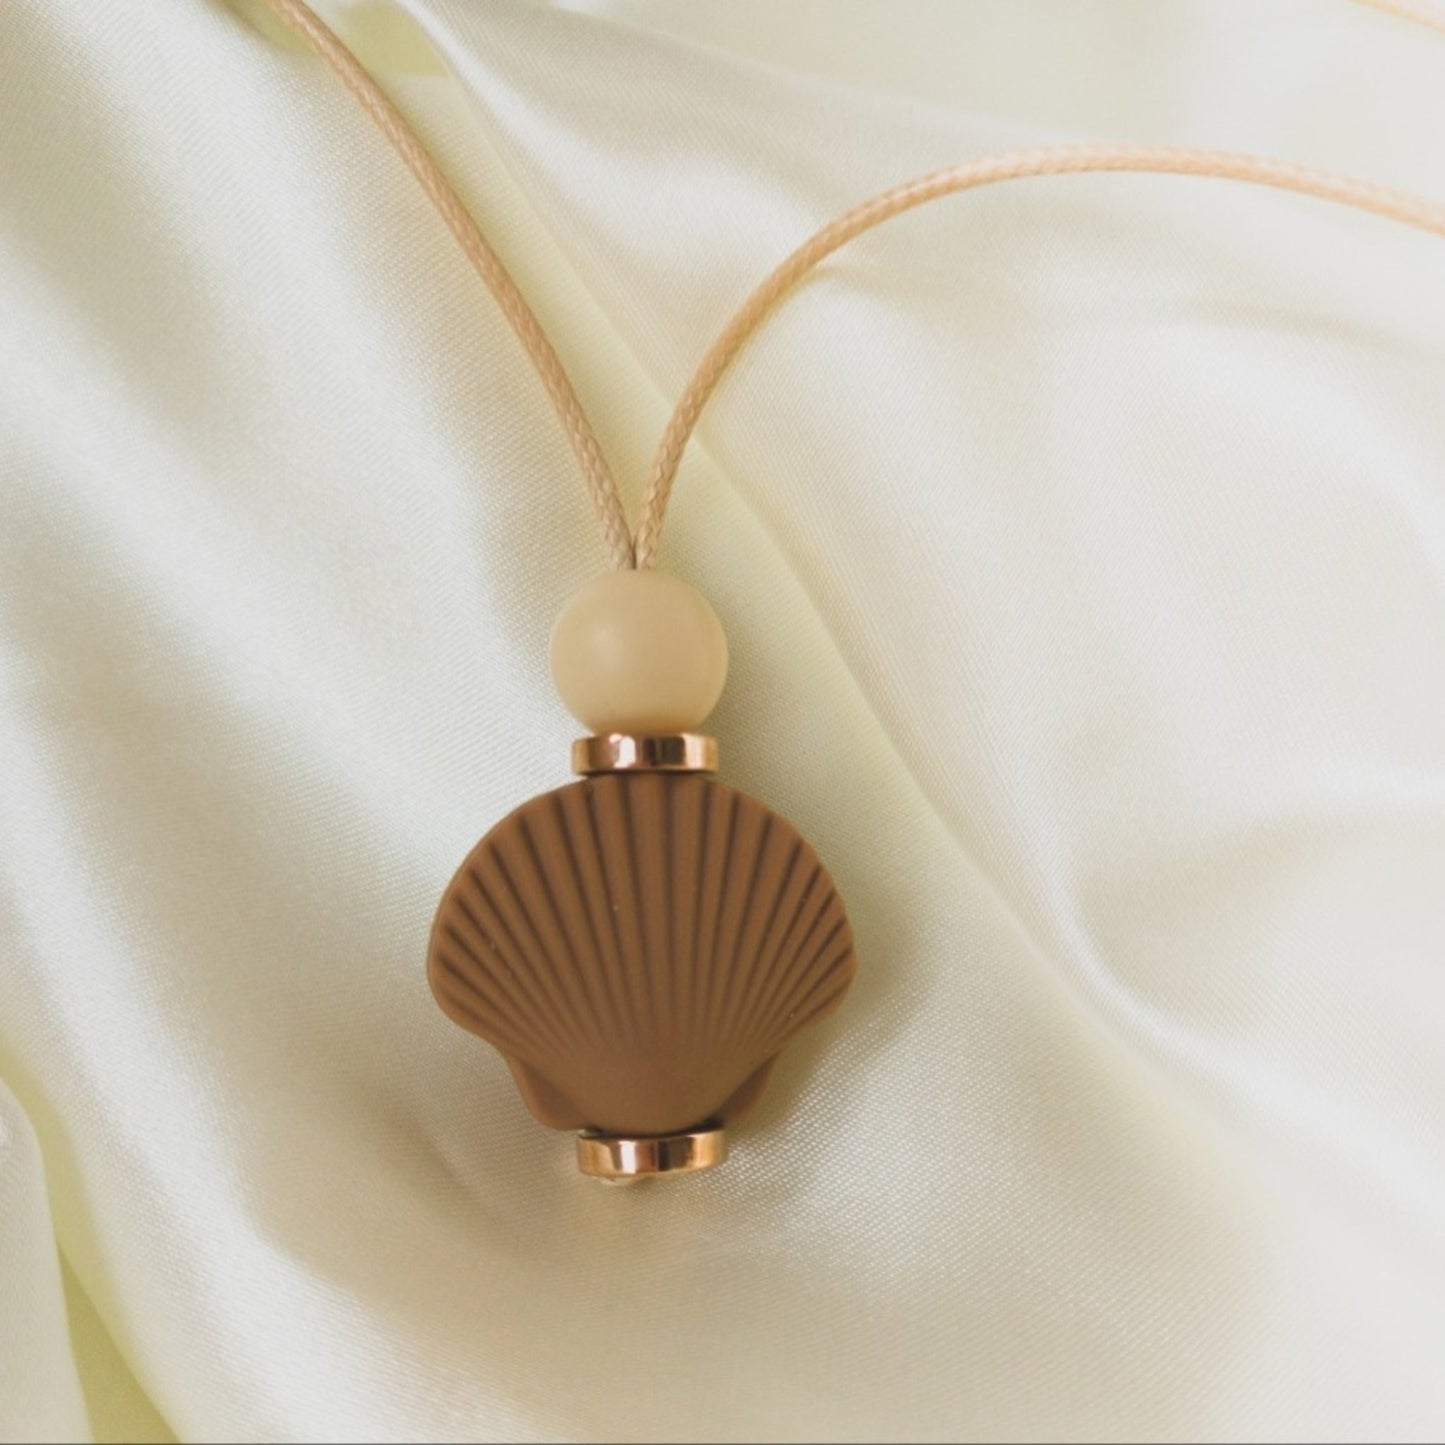 Bloomshell Pendant - Bennie Blooms Breastfeeding, Teething and Fiddle Jewellery at its finest.